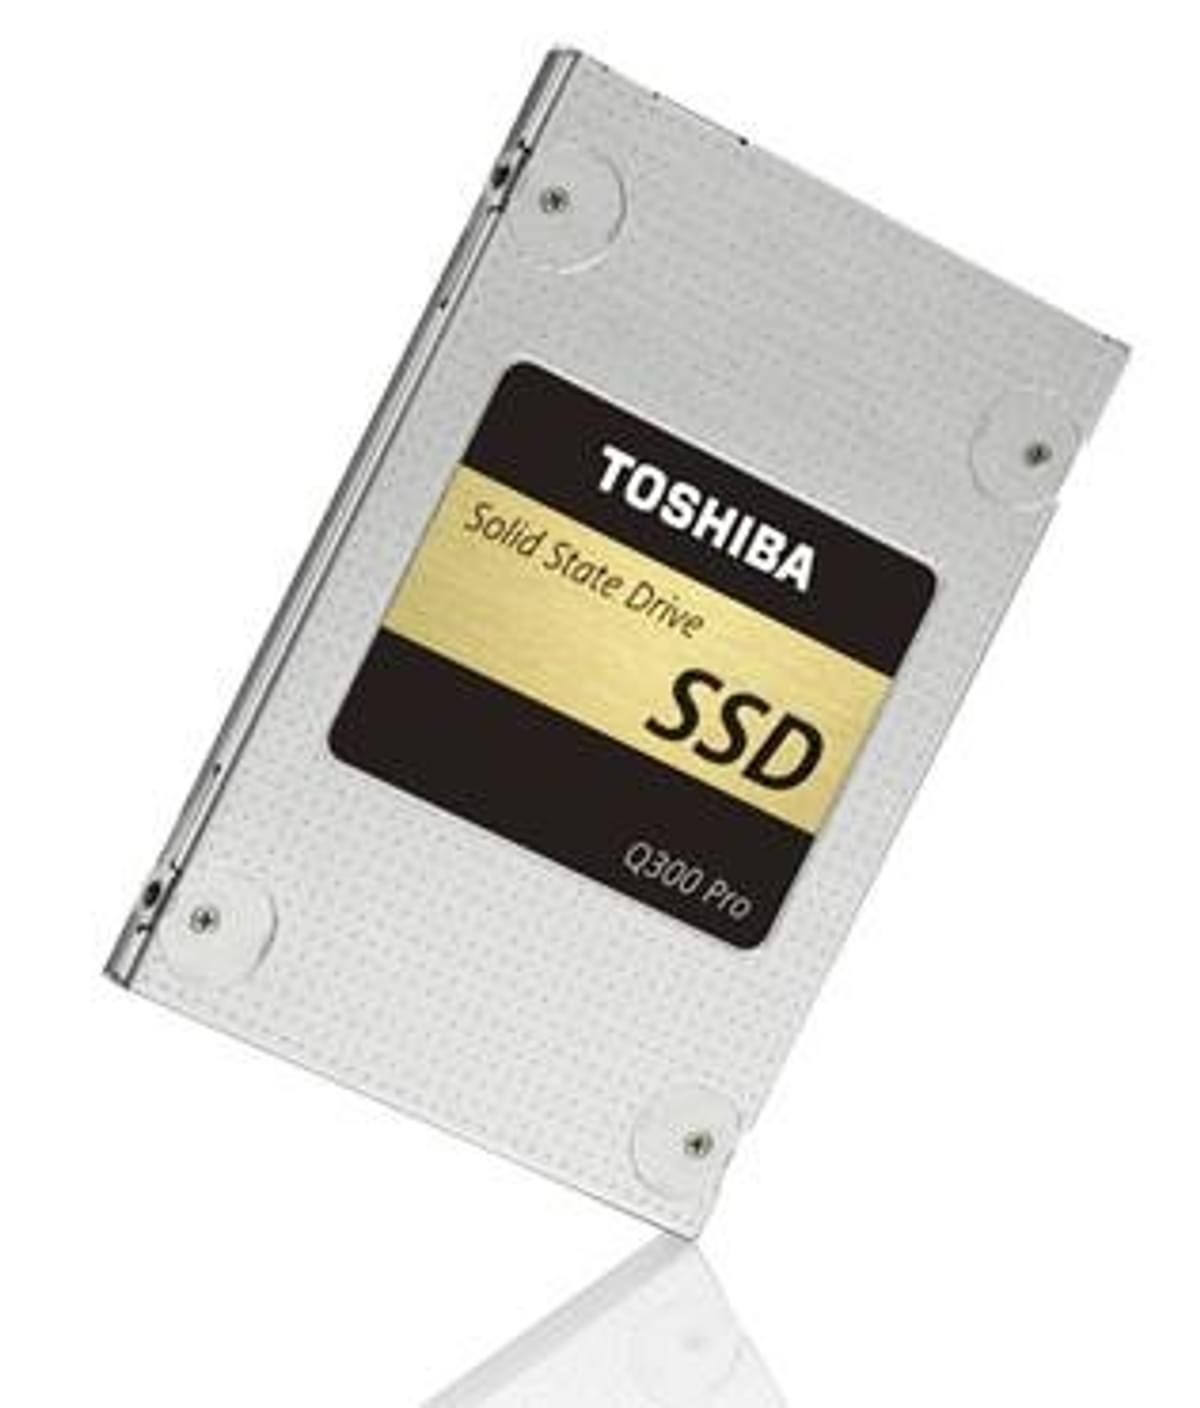 Toshiba Memory neemt SSD-divisie Lite-On over image